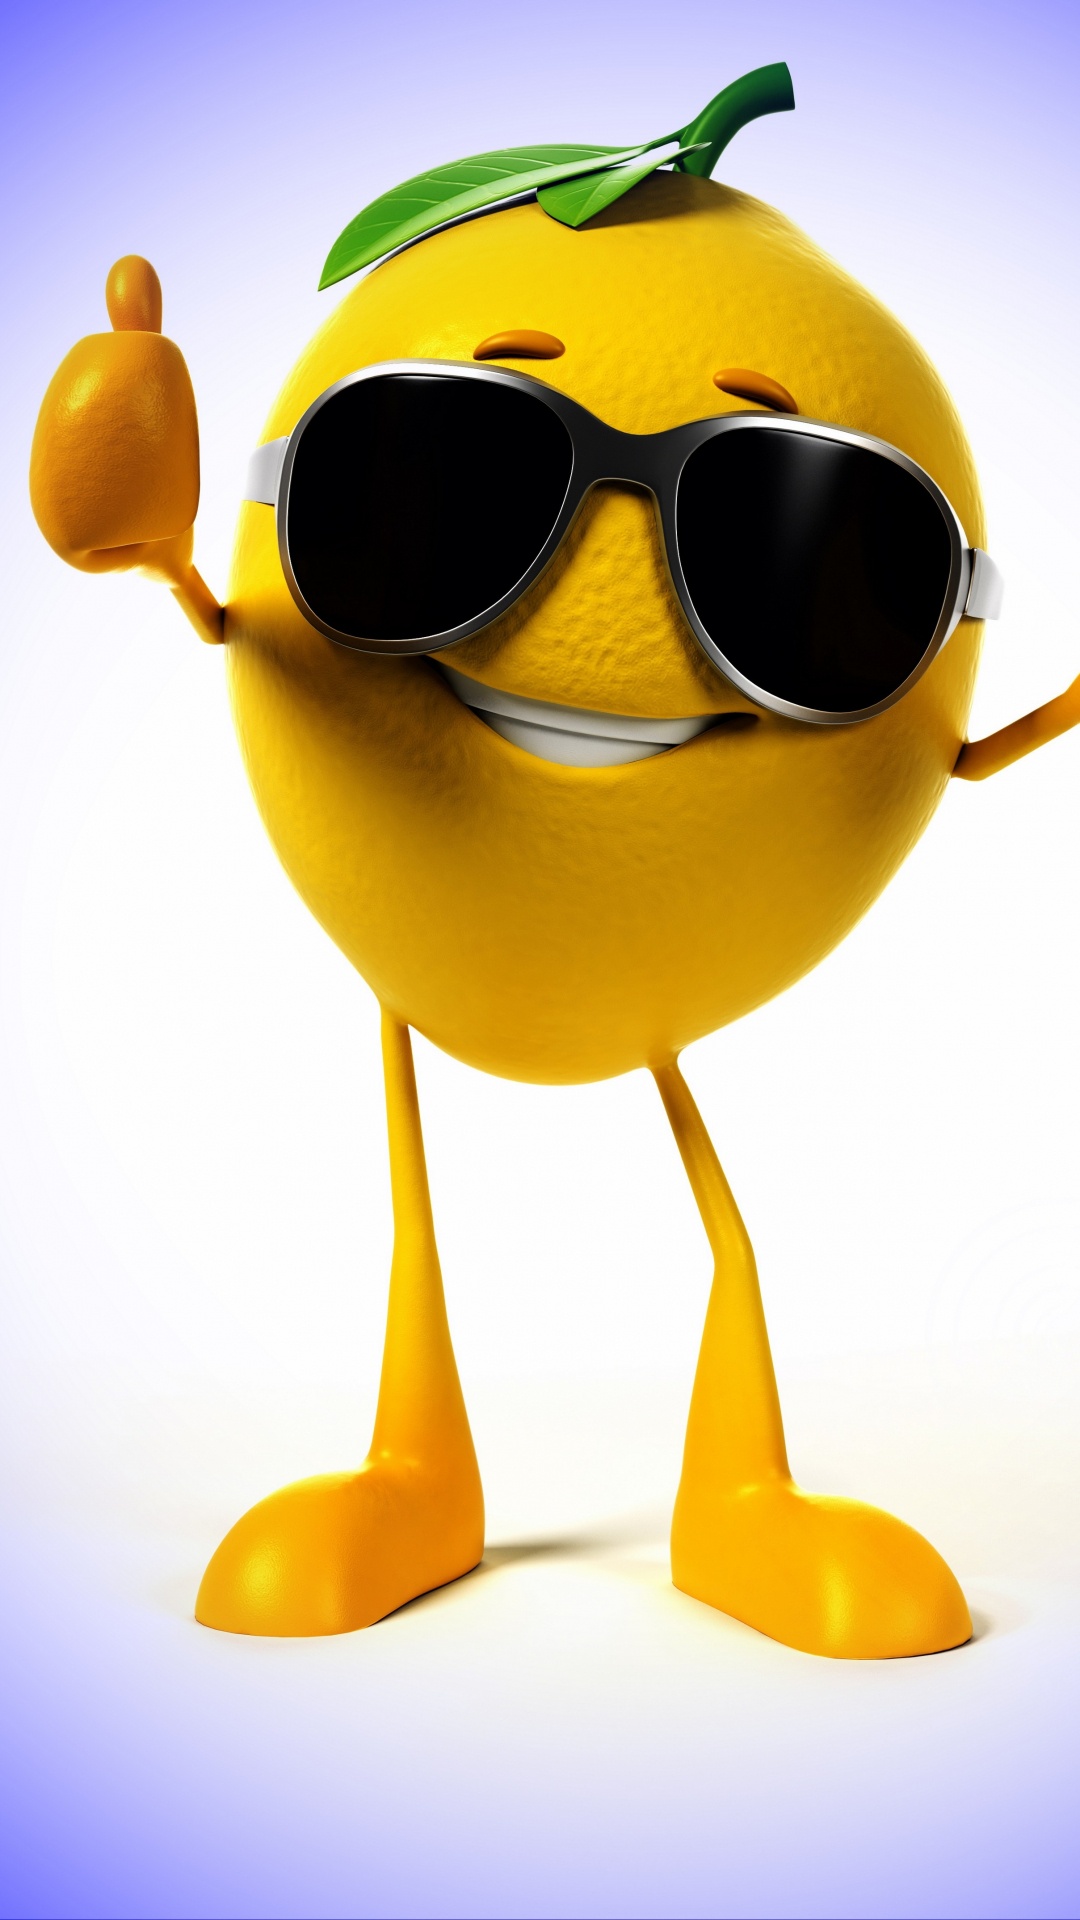 Yellow and Green Frog Wearing Sunglasses. Wallpaper in 1080x1920 Resolution